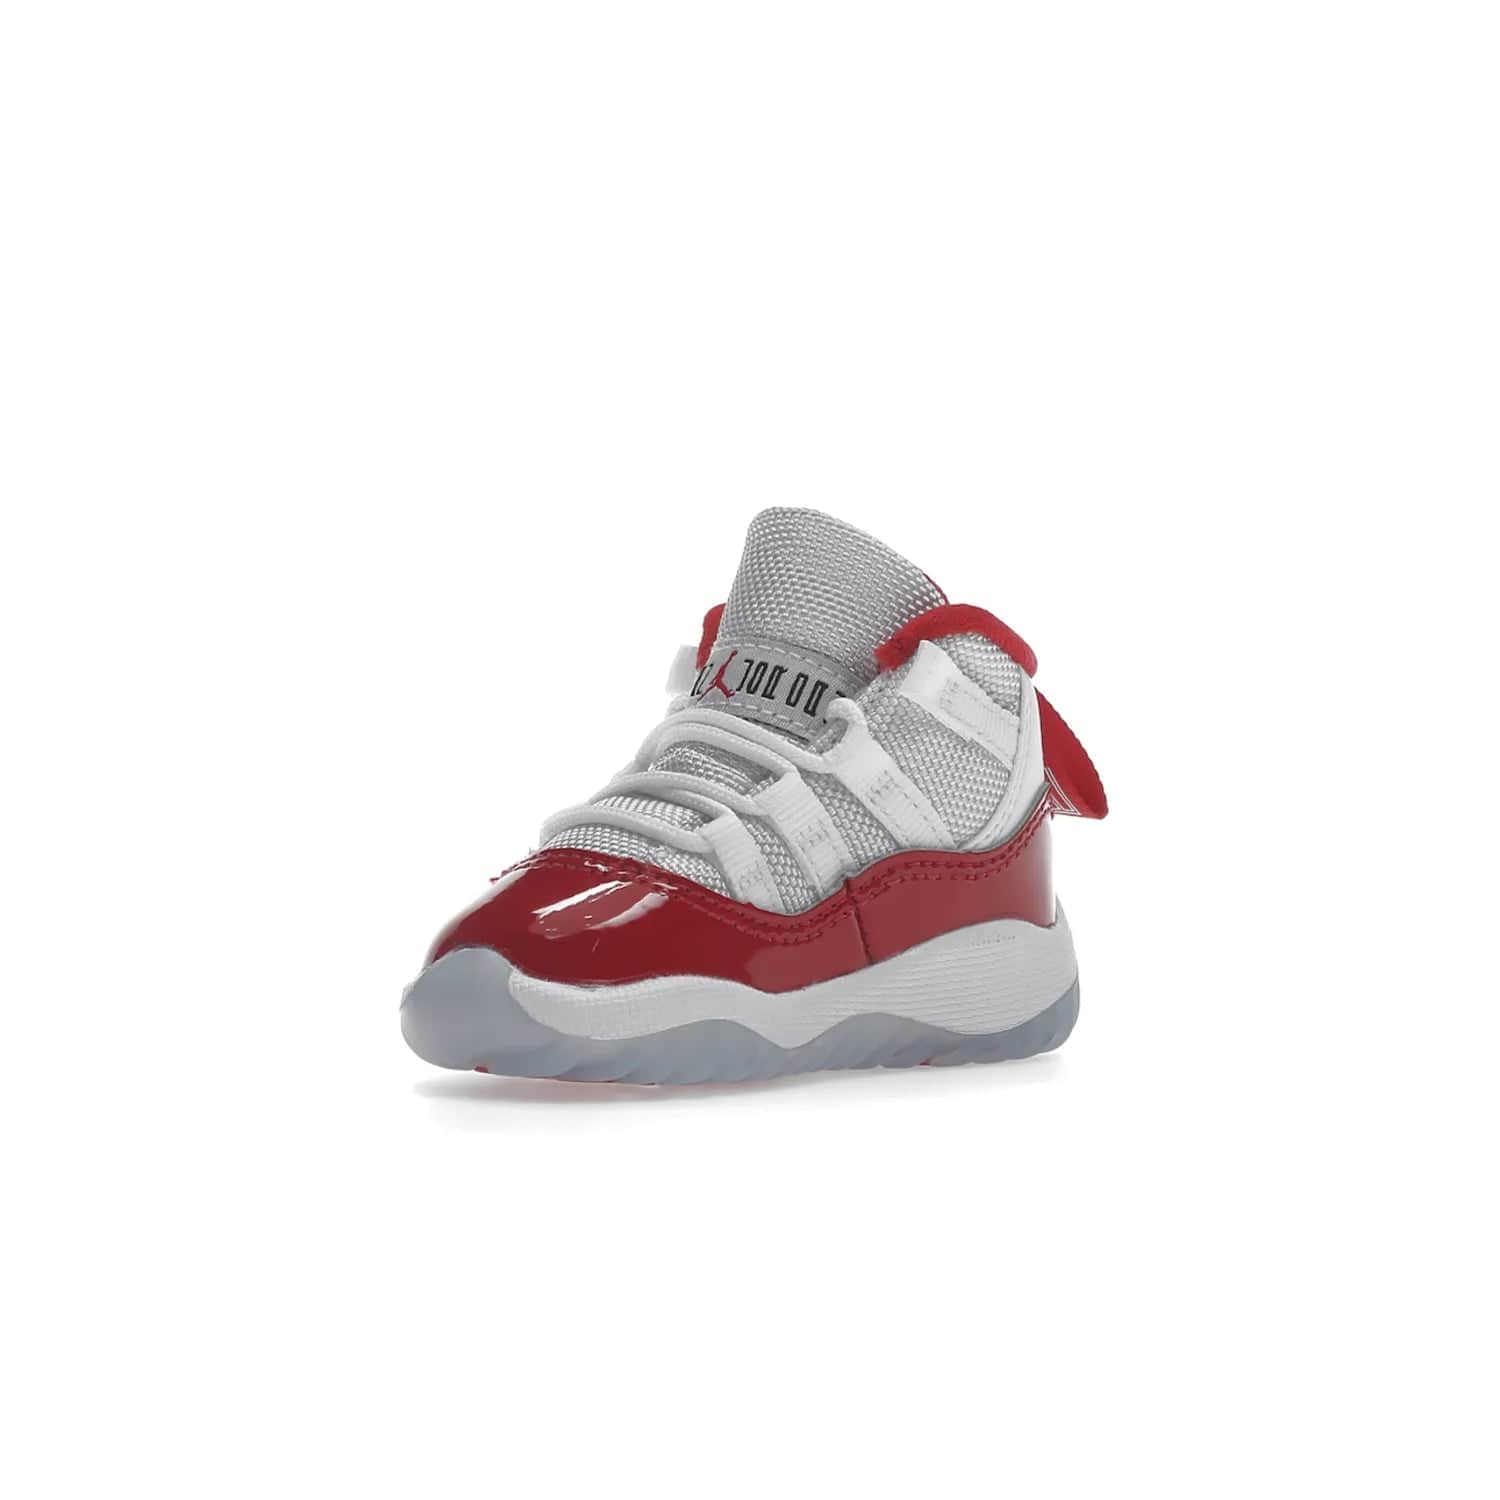 Jordan 11 Retro Cherry (2022) (TD) - Image 15 - Only at www.BallersClubKickz.com - Timeless classic. Air Jordan 11 Retro Cherry 2022 TD combines mesh, leather & suede for a unique look. White upper with varsity red suede. Jumpman logo on collar & tongue. Available Dec 10th, priced at $80.